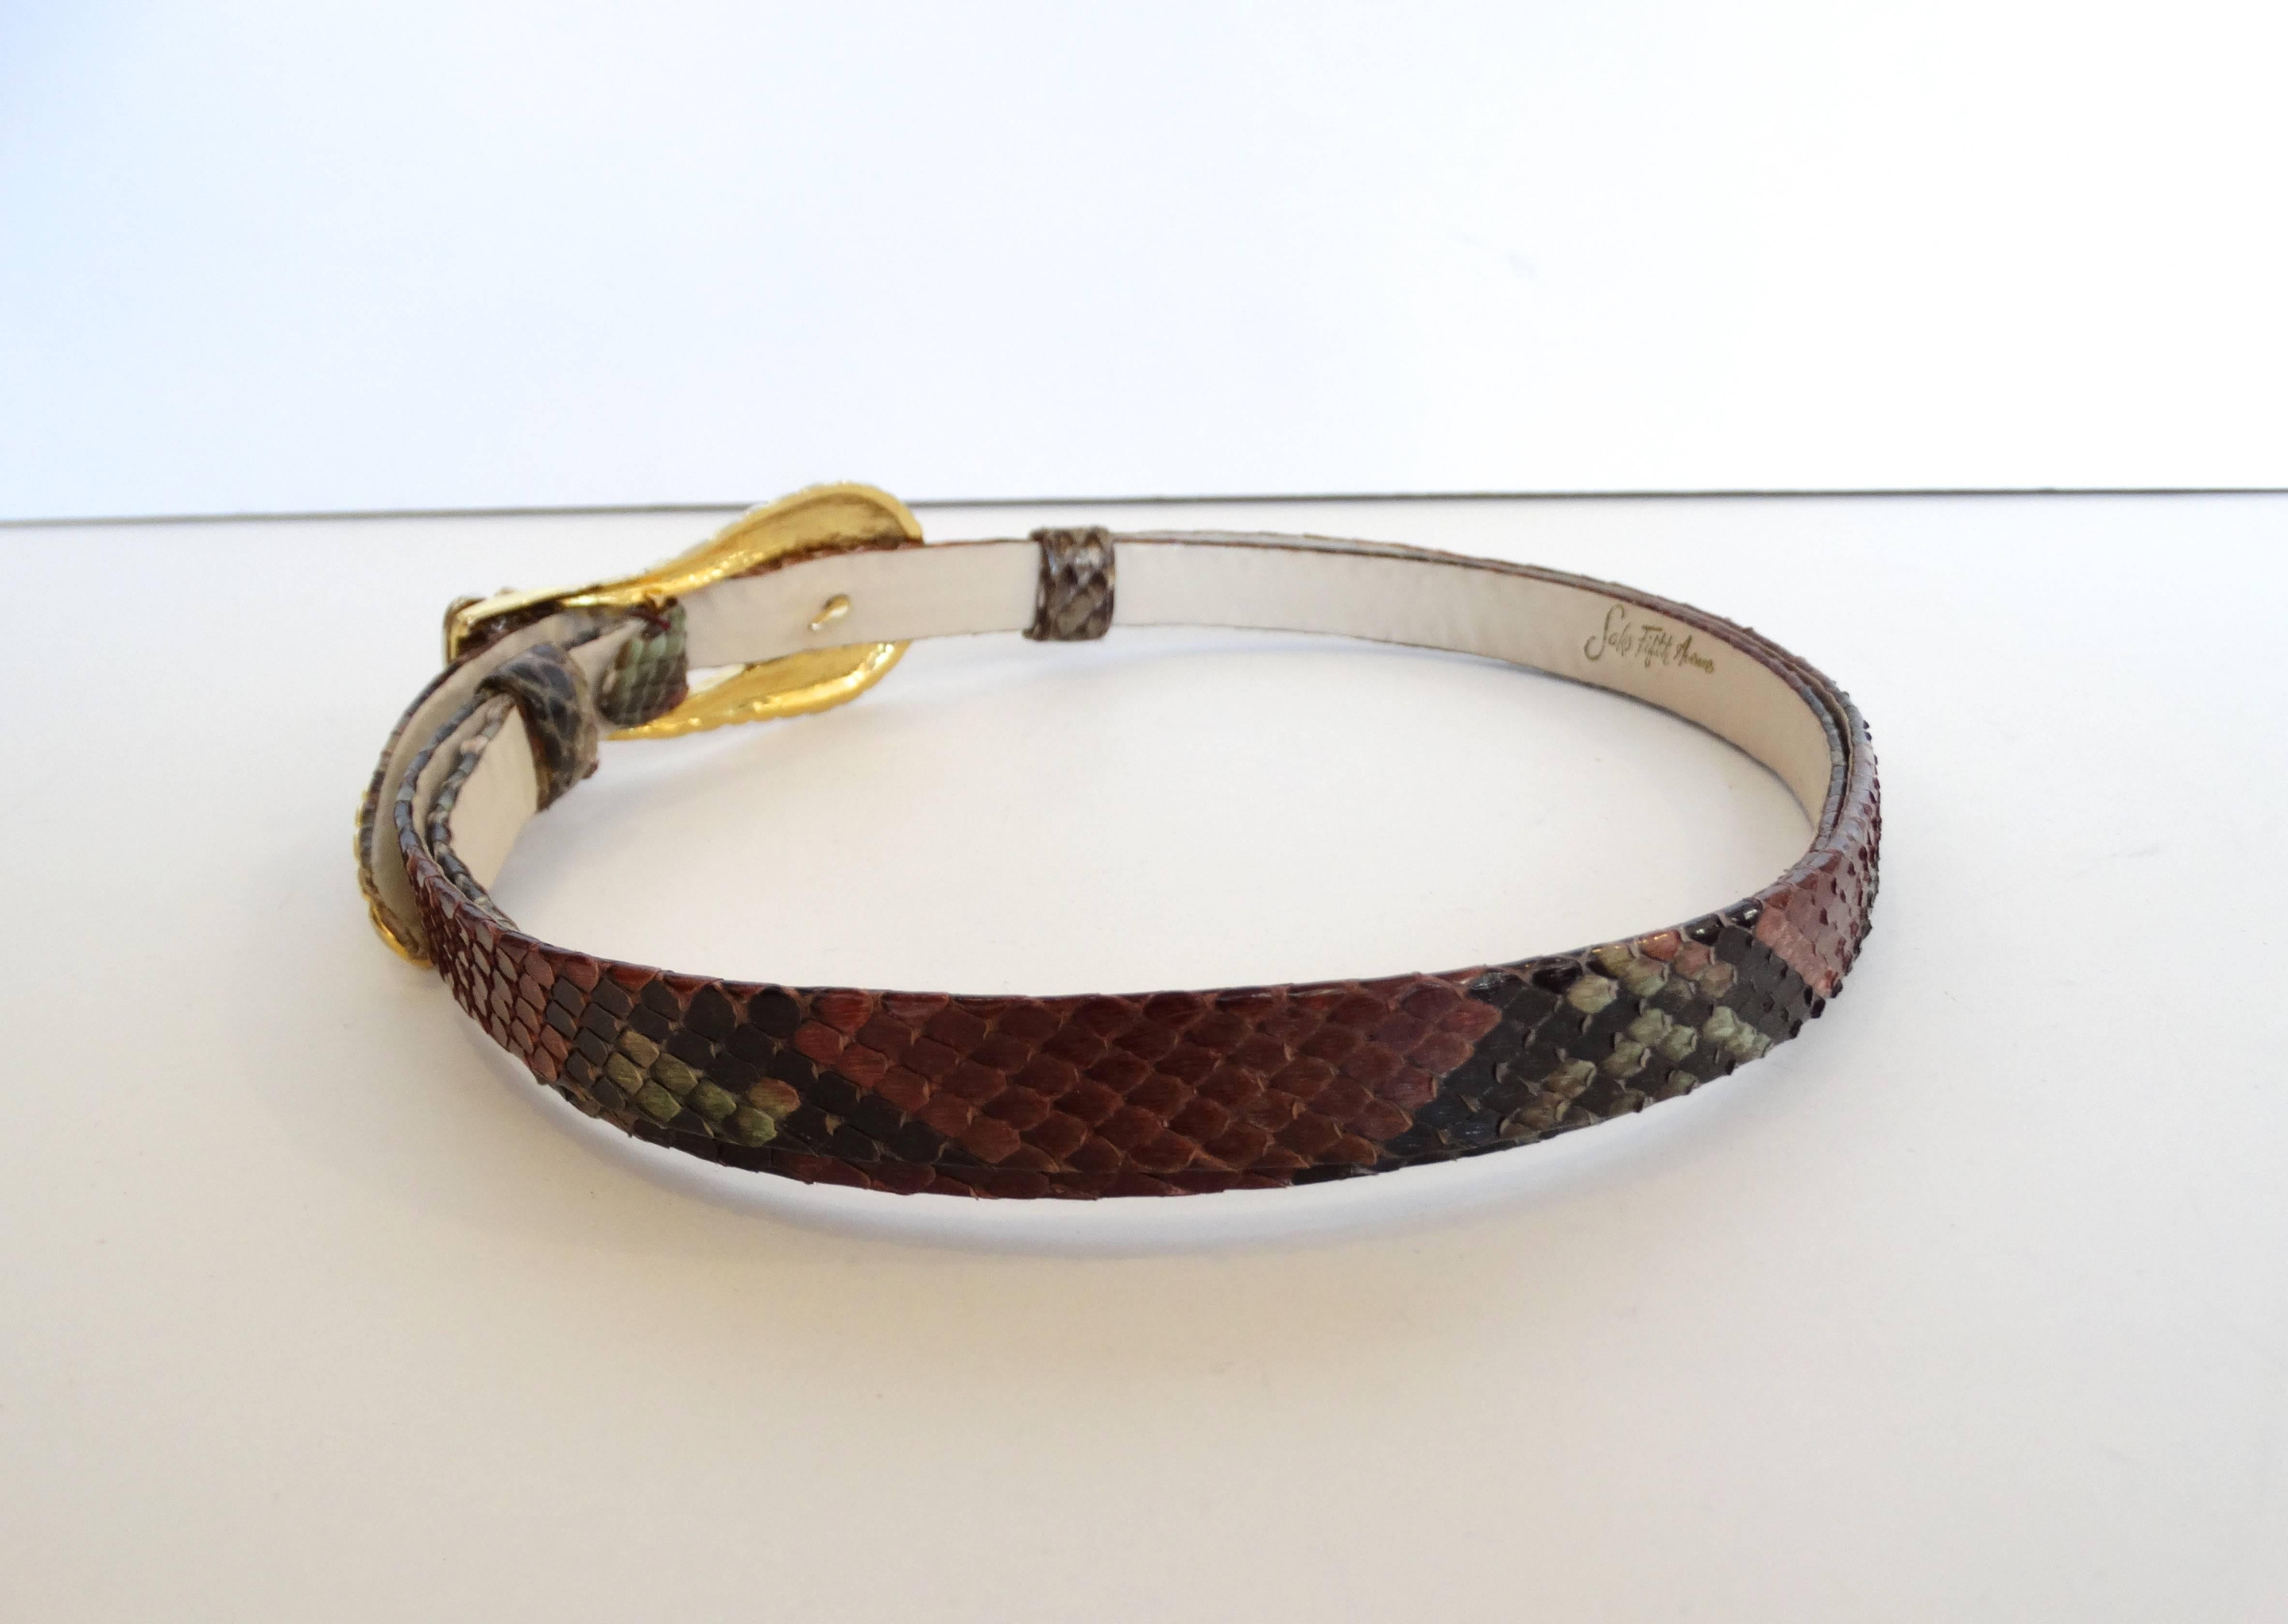 Amazing 1980s buckle belt from the iconic designer Judith Leiber for Saks Fifth Avenue! Gold metal belt buckle with silver crown accent. Hooks in the front beneath the buckle. Thin multicolored snakeskin belt adjusts to whatever size you want by